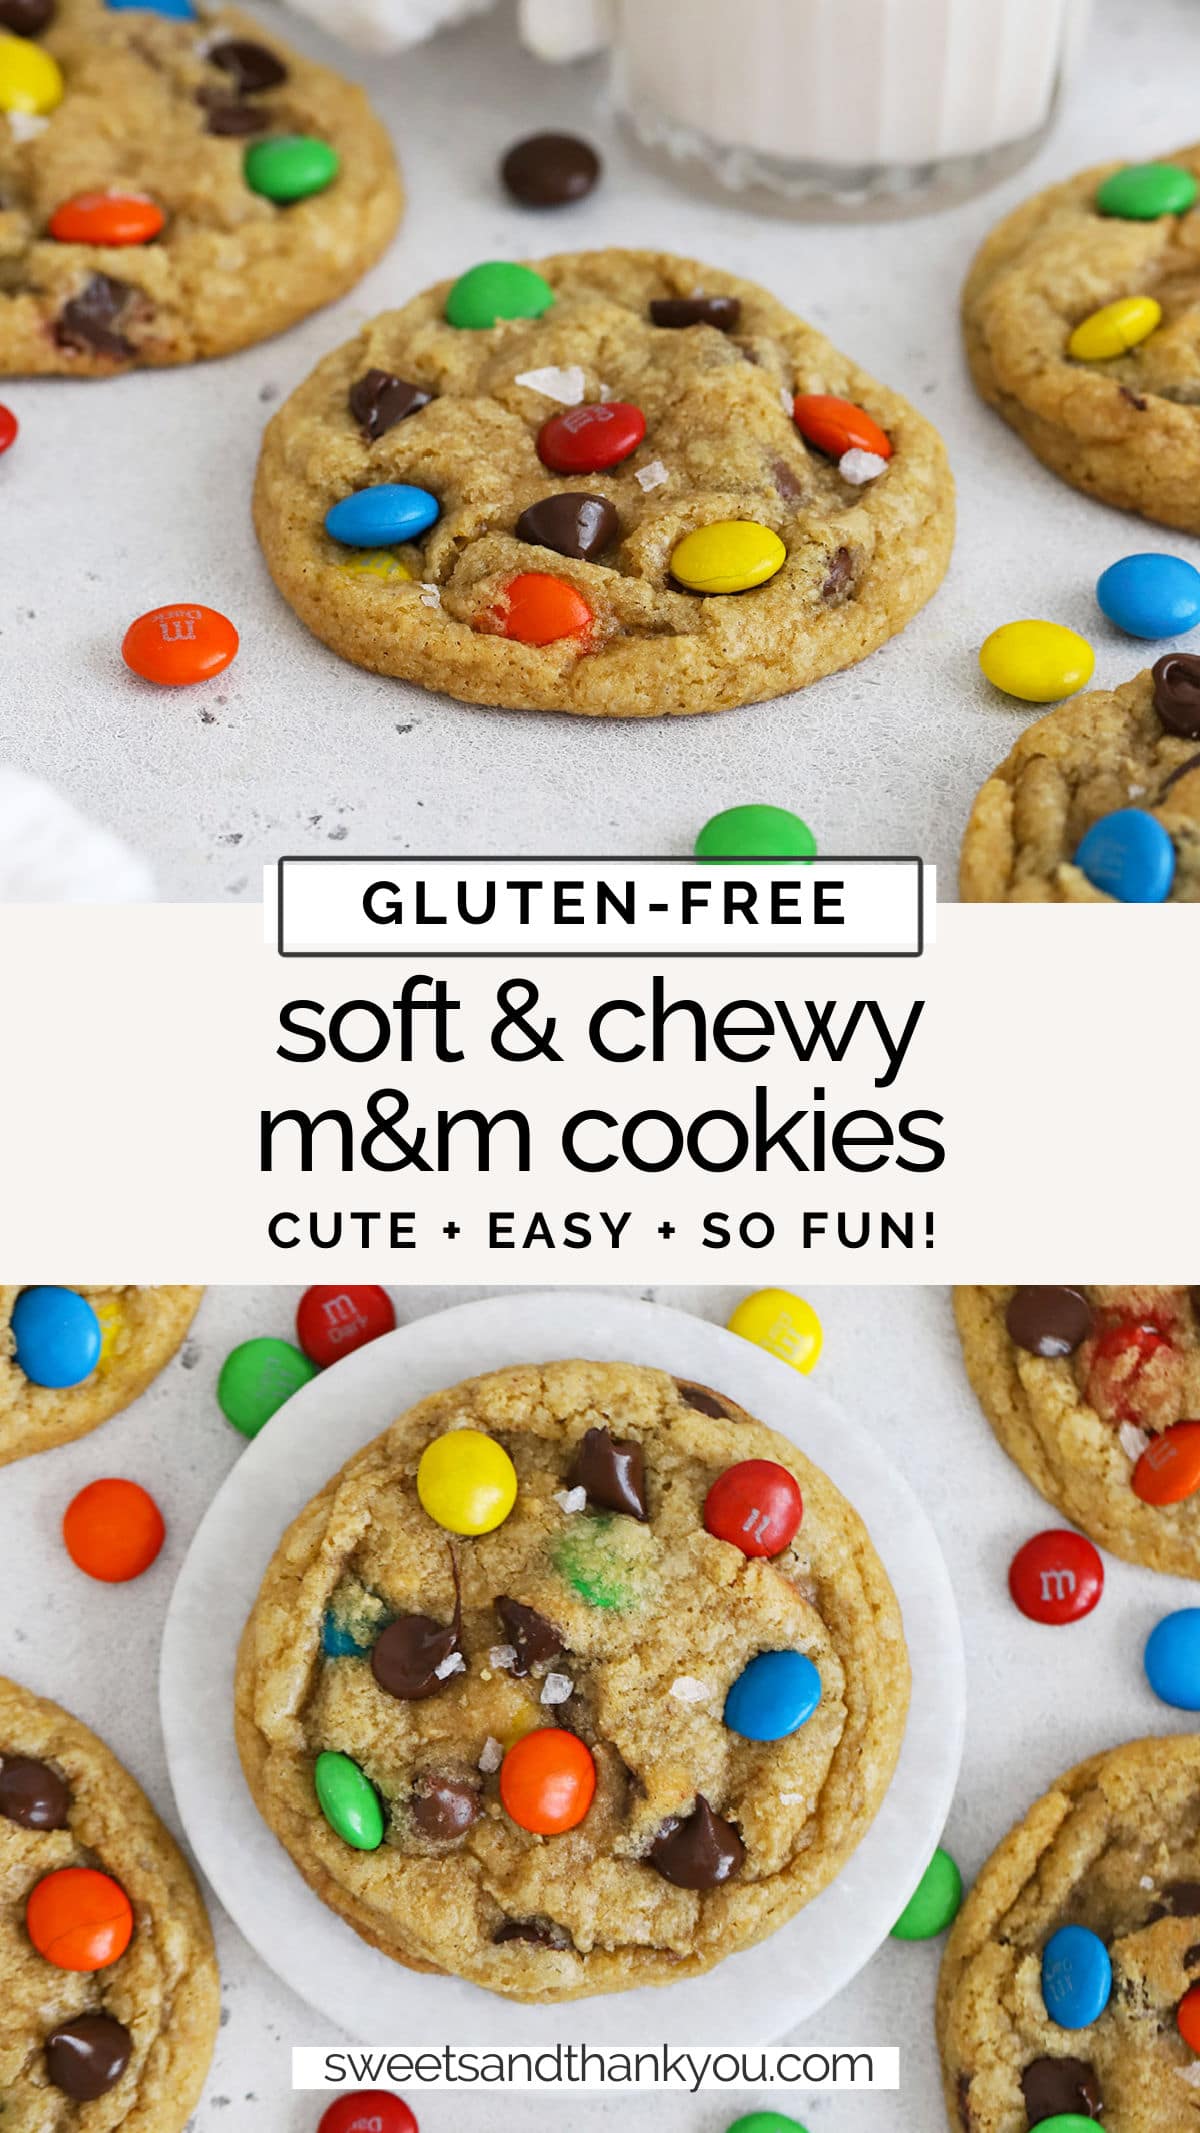 Soft & Chewy Gluten-Free M&M Cookies - This easy gluten-free m&m cookie recipe is perfect for your next cookie craving! Try it with seasonal m&ms to celebrate the holidays! // gluten-free mm cookies // gluten free m&m chocolate chip cookies // gluten-free christmas m&m cookies // gluten-free valentine's m&m cookies // gluten-free christmas cookies // gluten-free valentine's day cookies // gluten-free cookie recipe // gluten free m&m cookies recipe // the best gluten-free m&m cookies